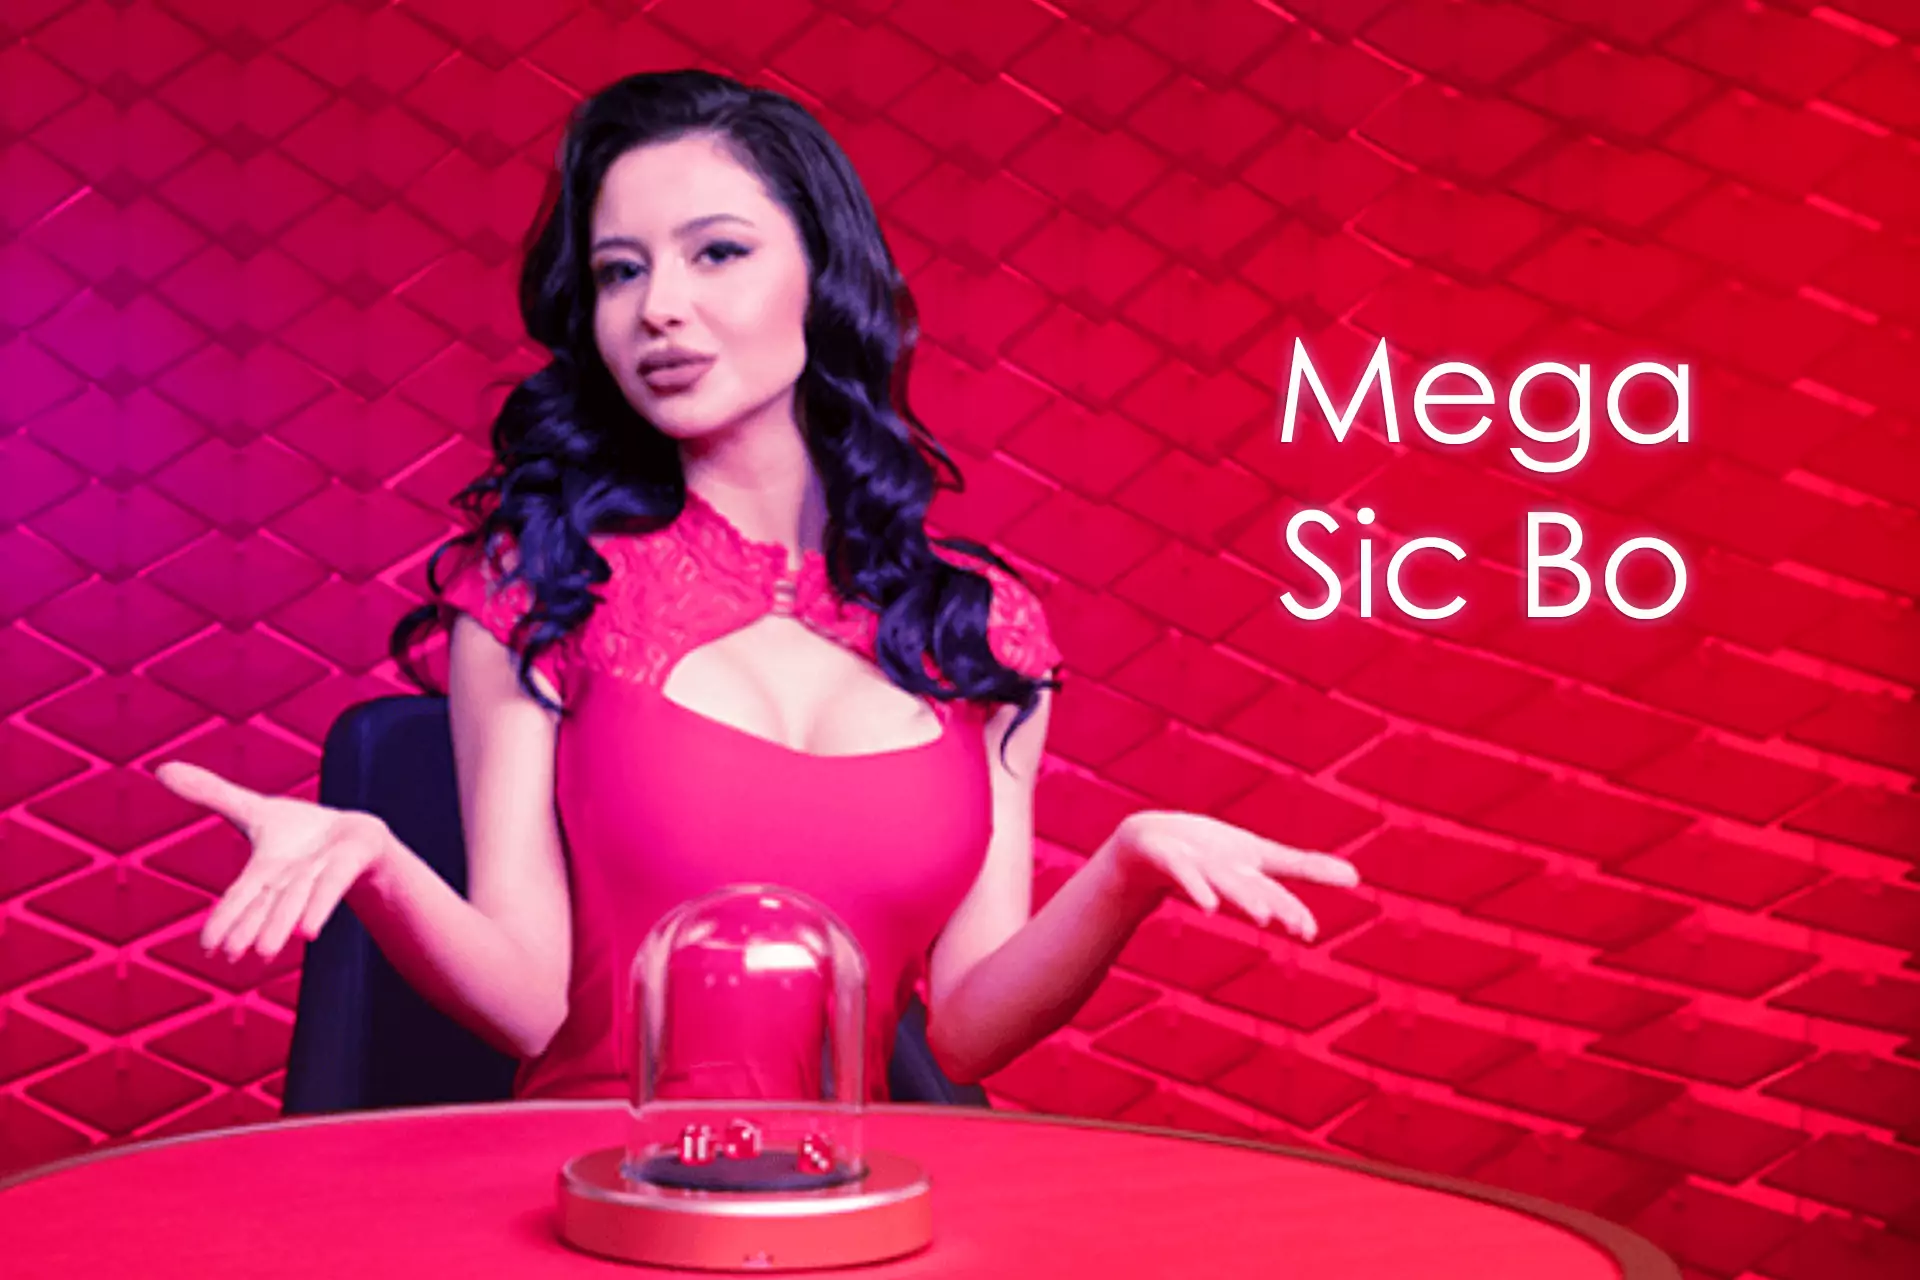 In Mega Sic Bo, you are expected to predict the outcome of 3 rolled dice.